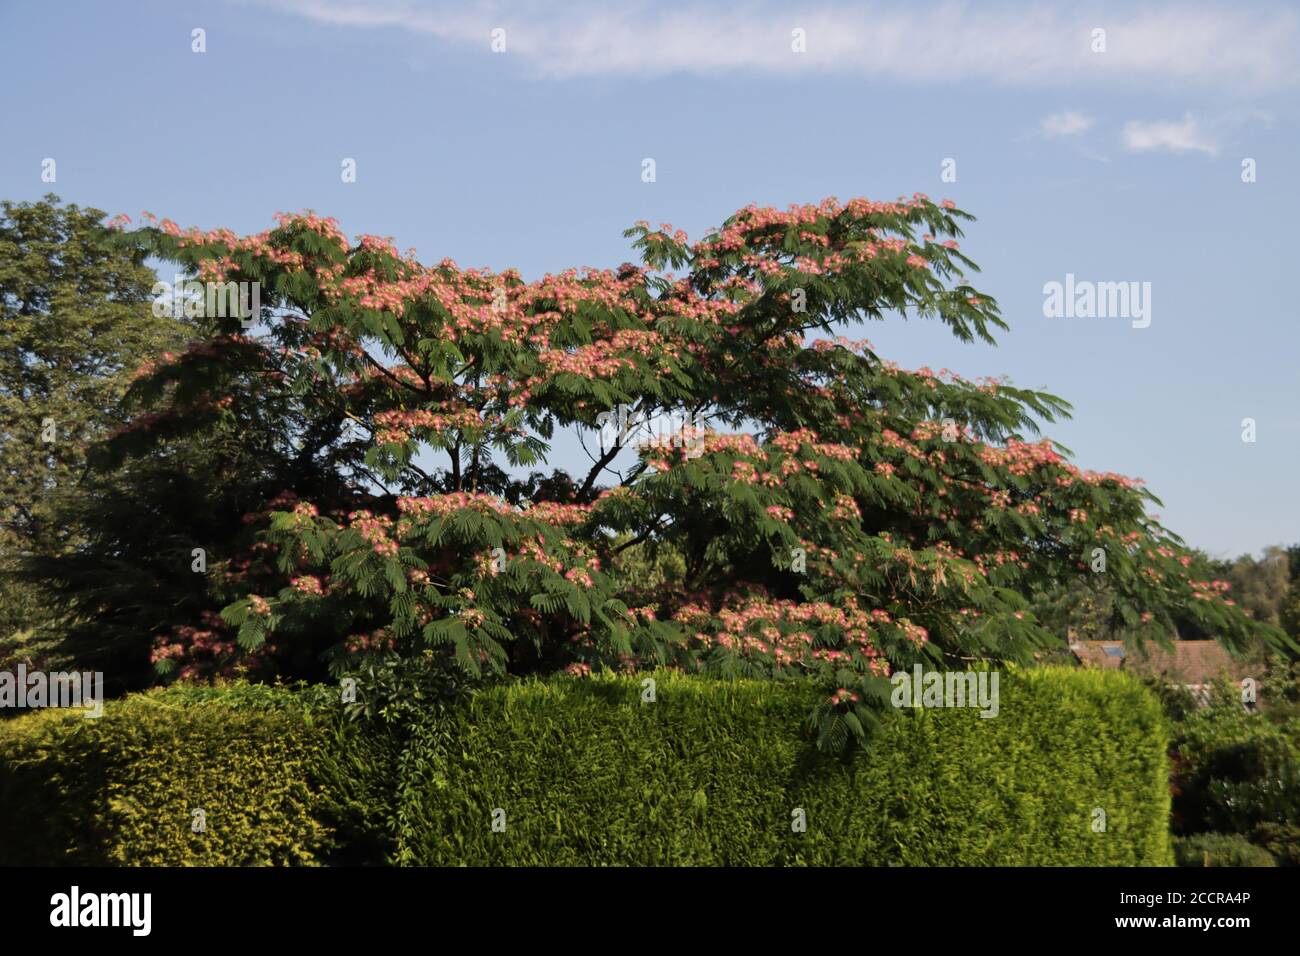 Albizia julibrissin Boubri or Ombrella tree with fluffy pink and white  flowers during summer Stock Photo - Alamy